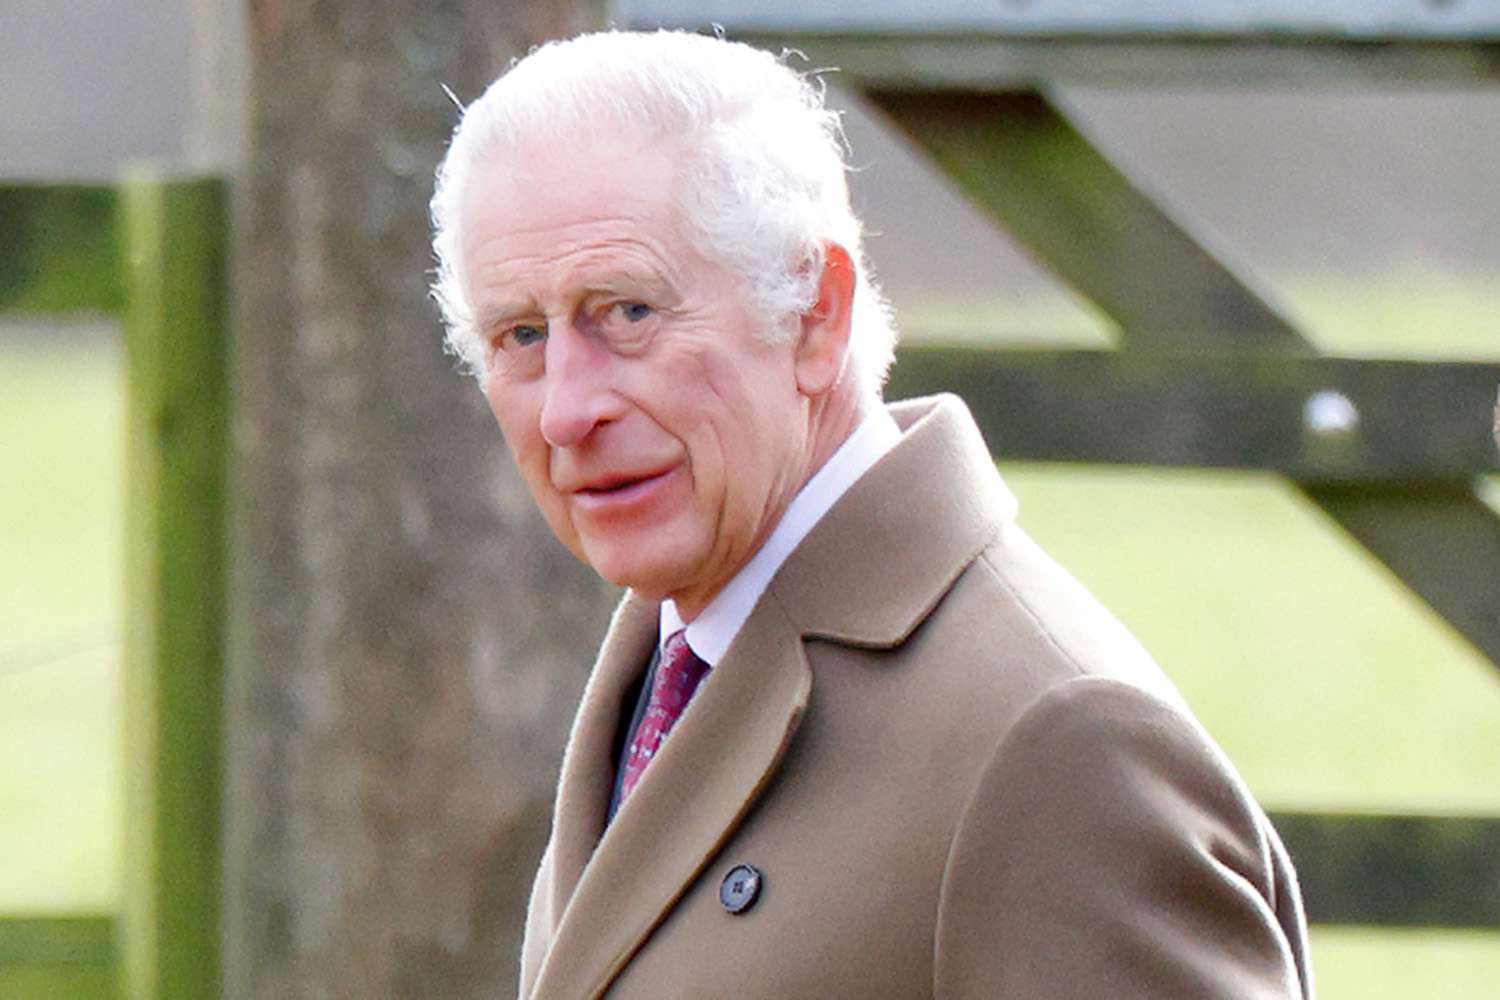 King Charles revealed to have a cancer post prostate treatment (Credits: People)